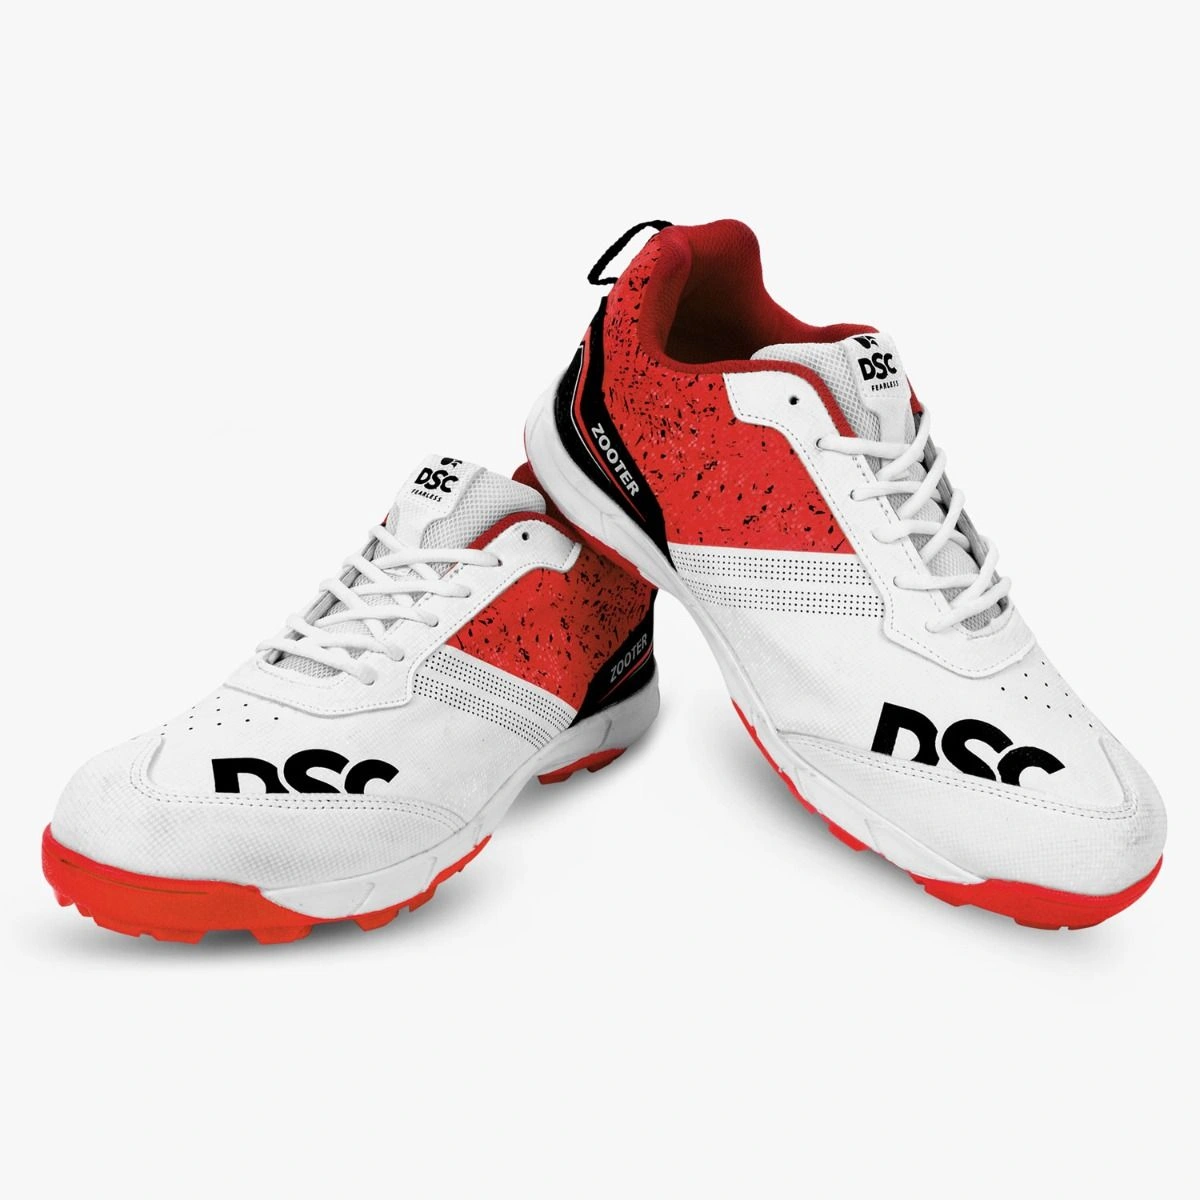 DSC ZOOTER CRICKET SHOES-10-WHITE/RED-3